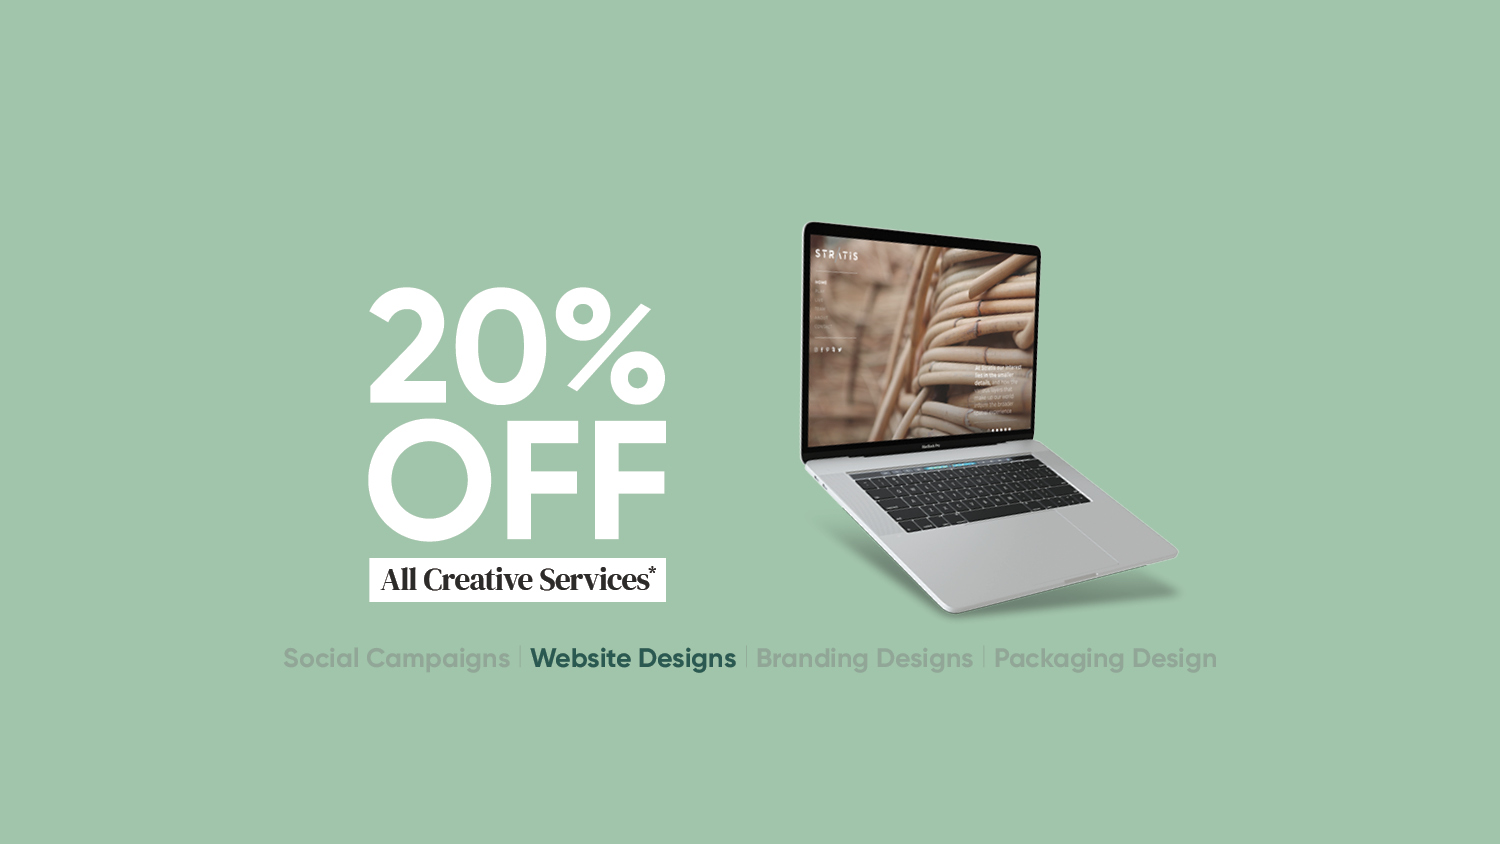 20% Off Discount on Website Design - Synergy Creative Agency Melbourne